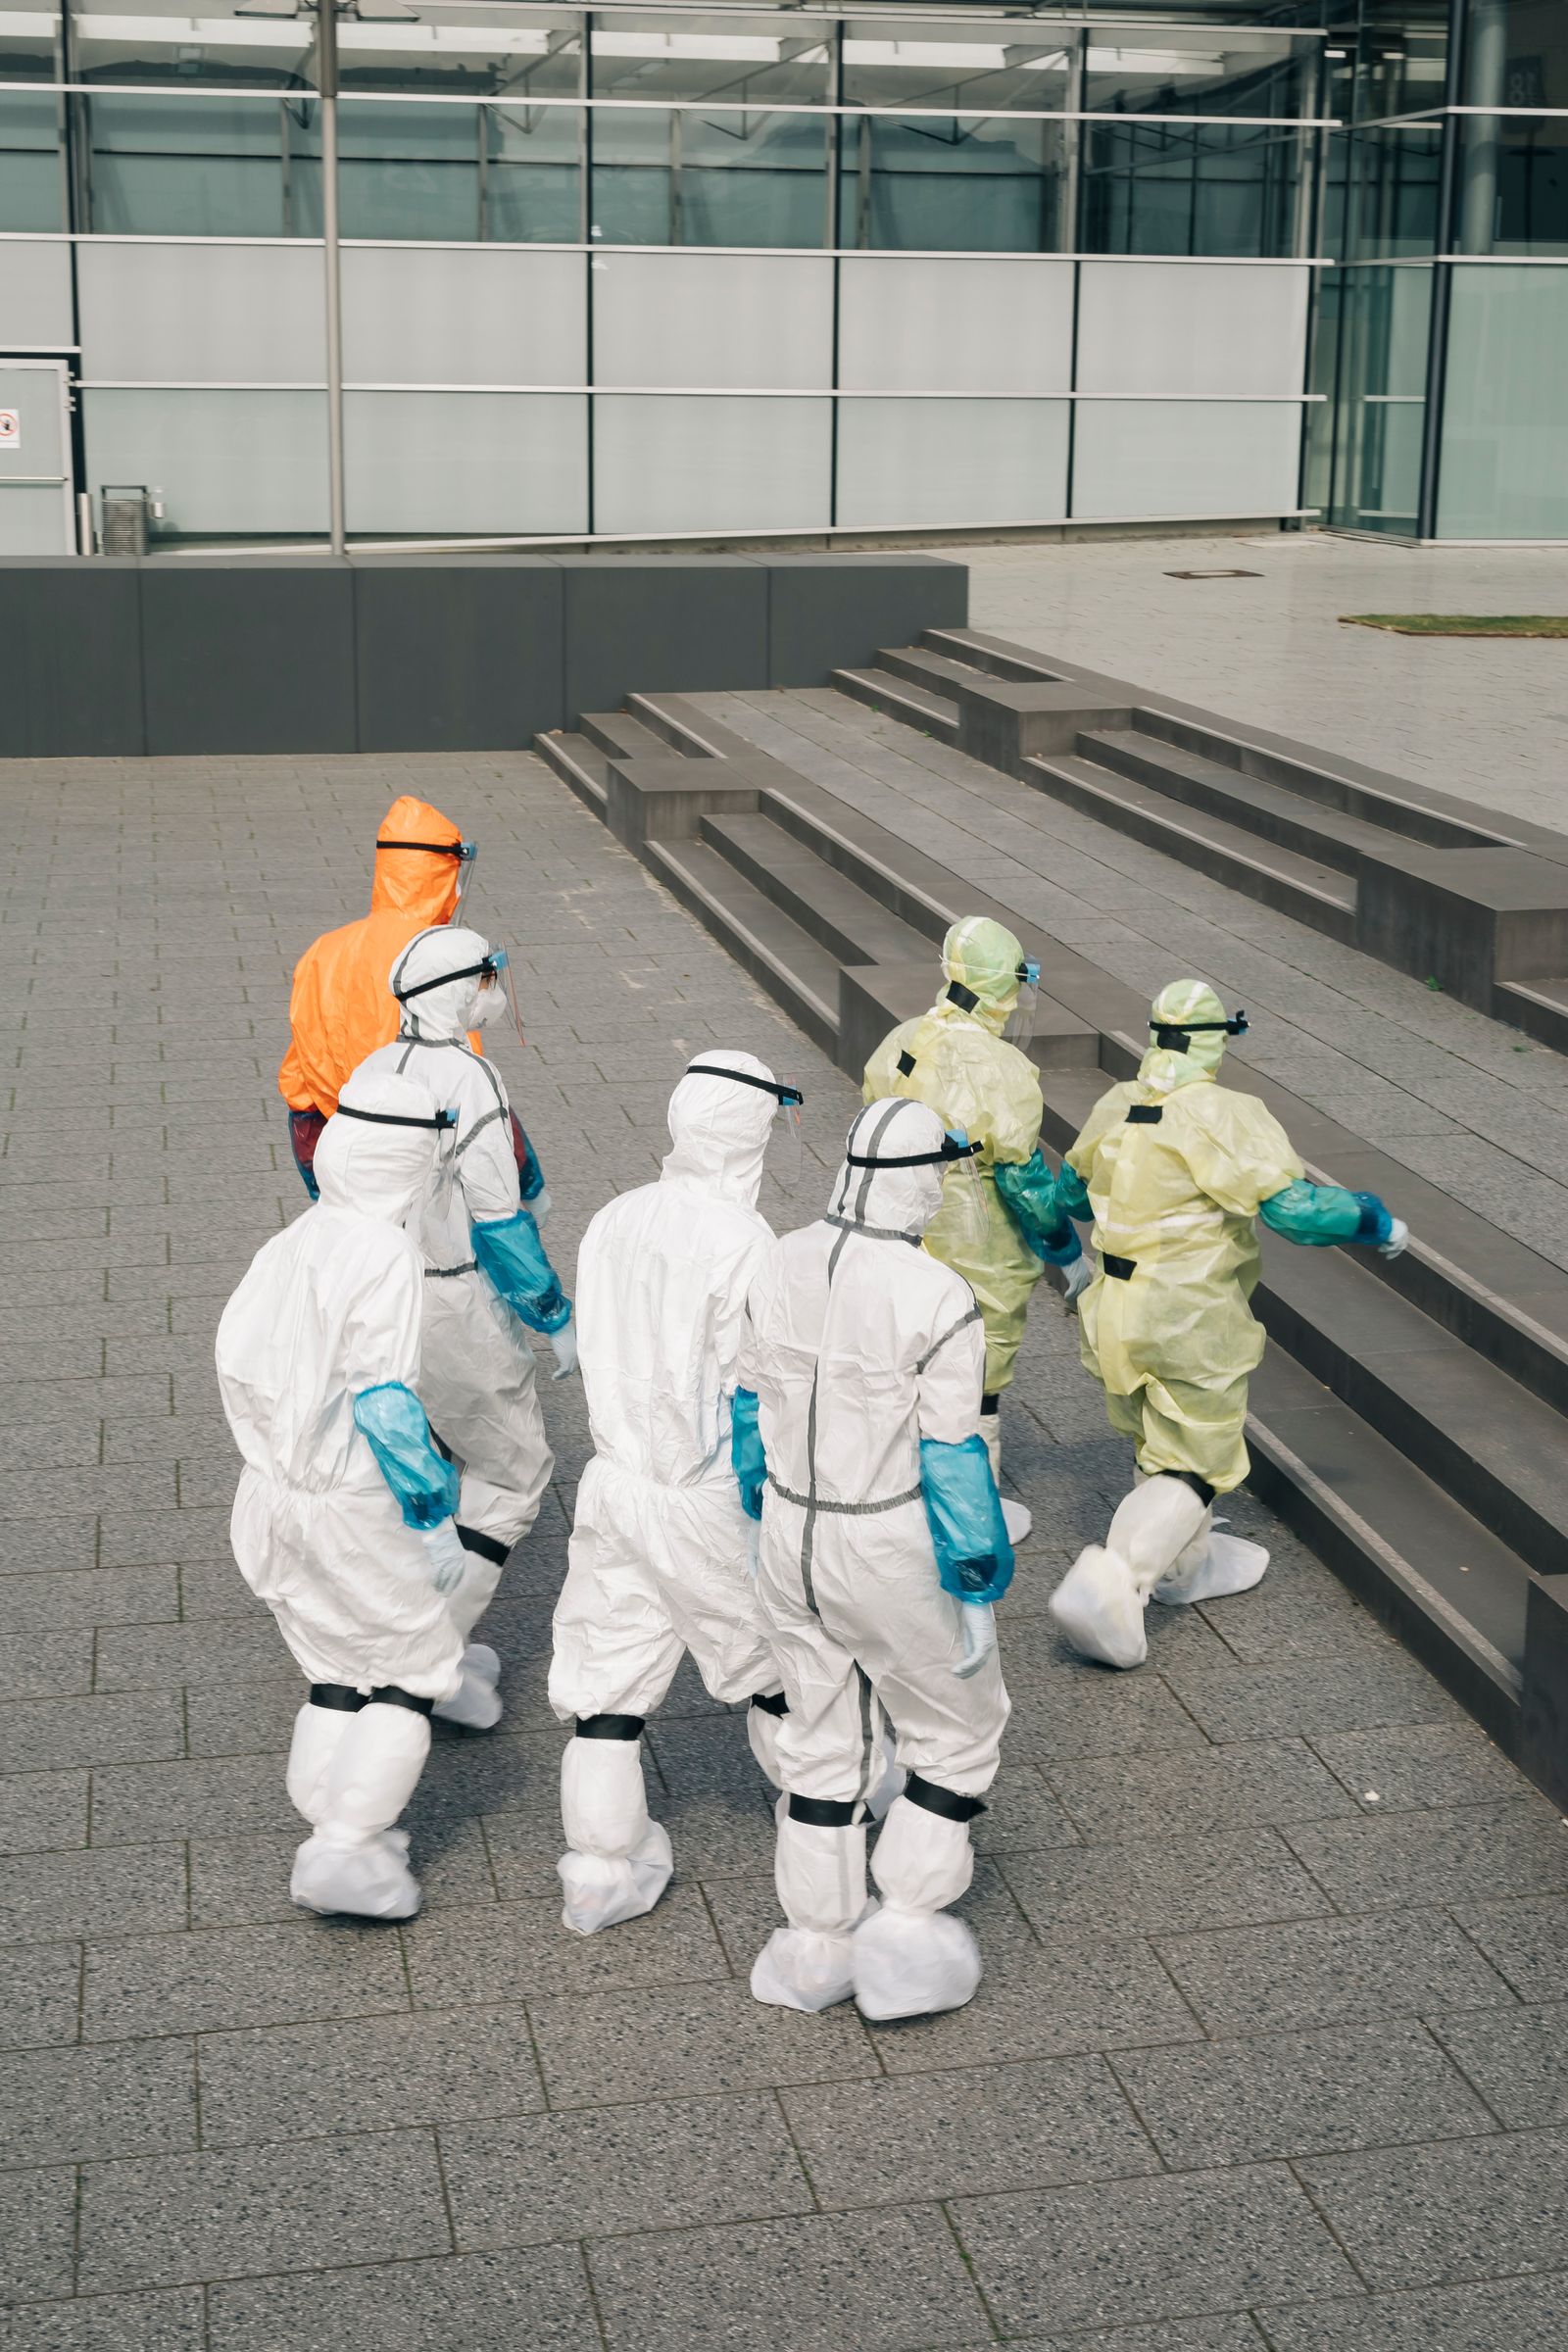 © Rafael Heygster - Soldiers on the way to an exercise at a makeshift hospital in the exhibition halls in Hannover.